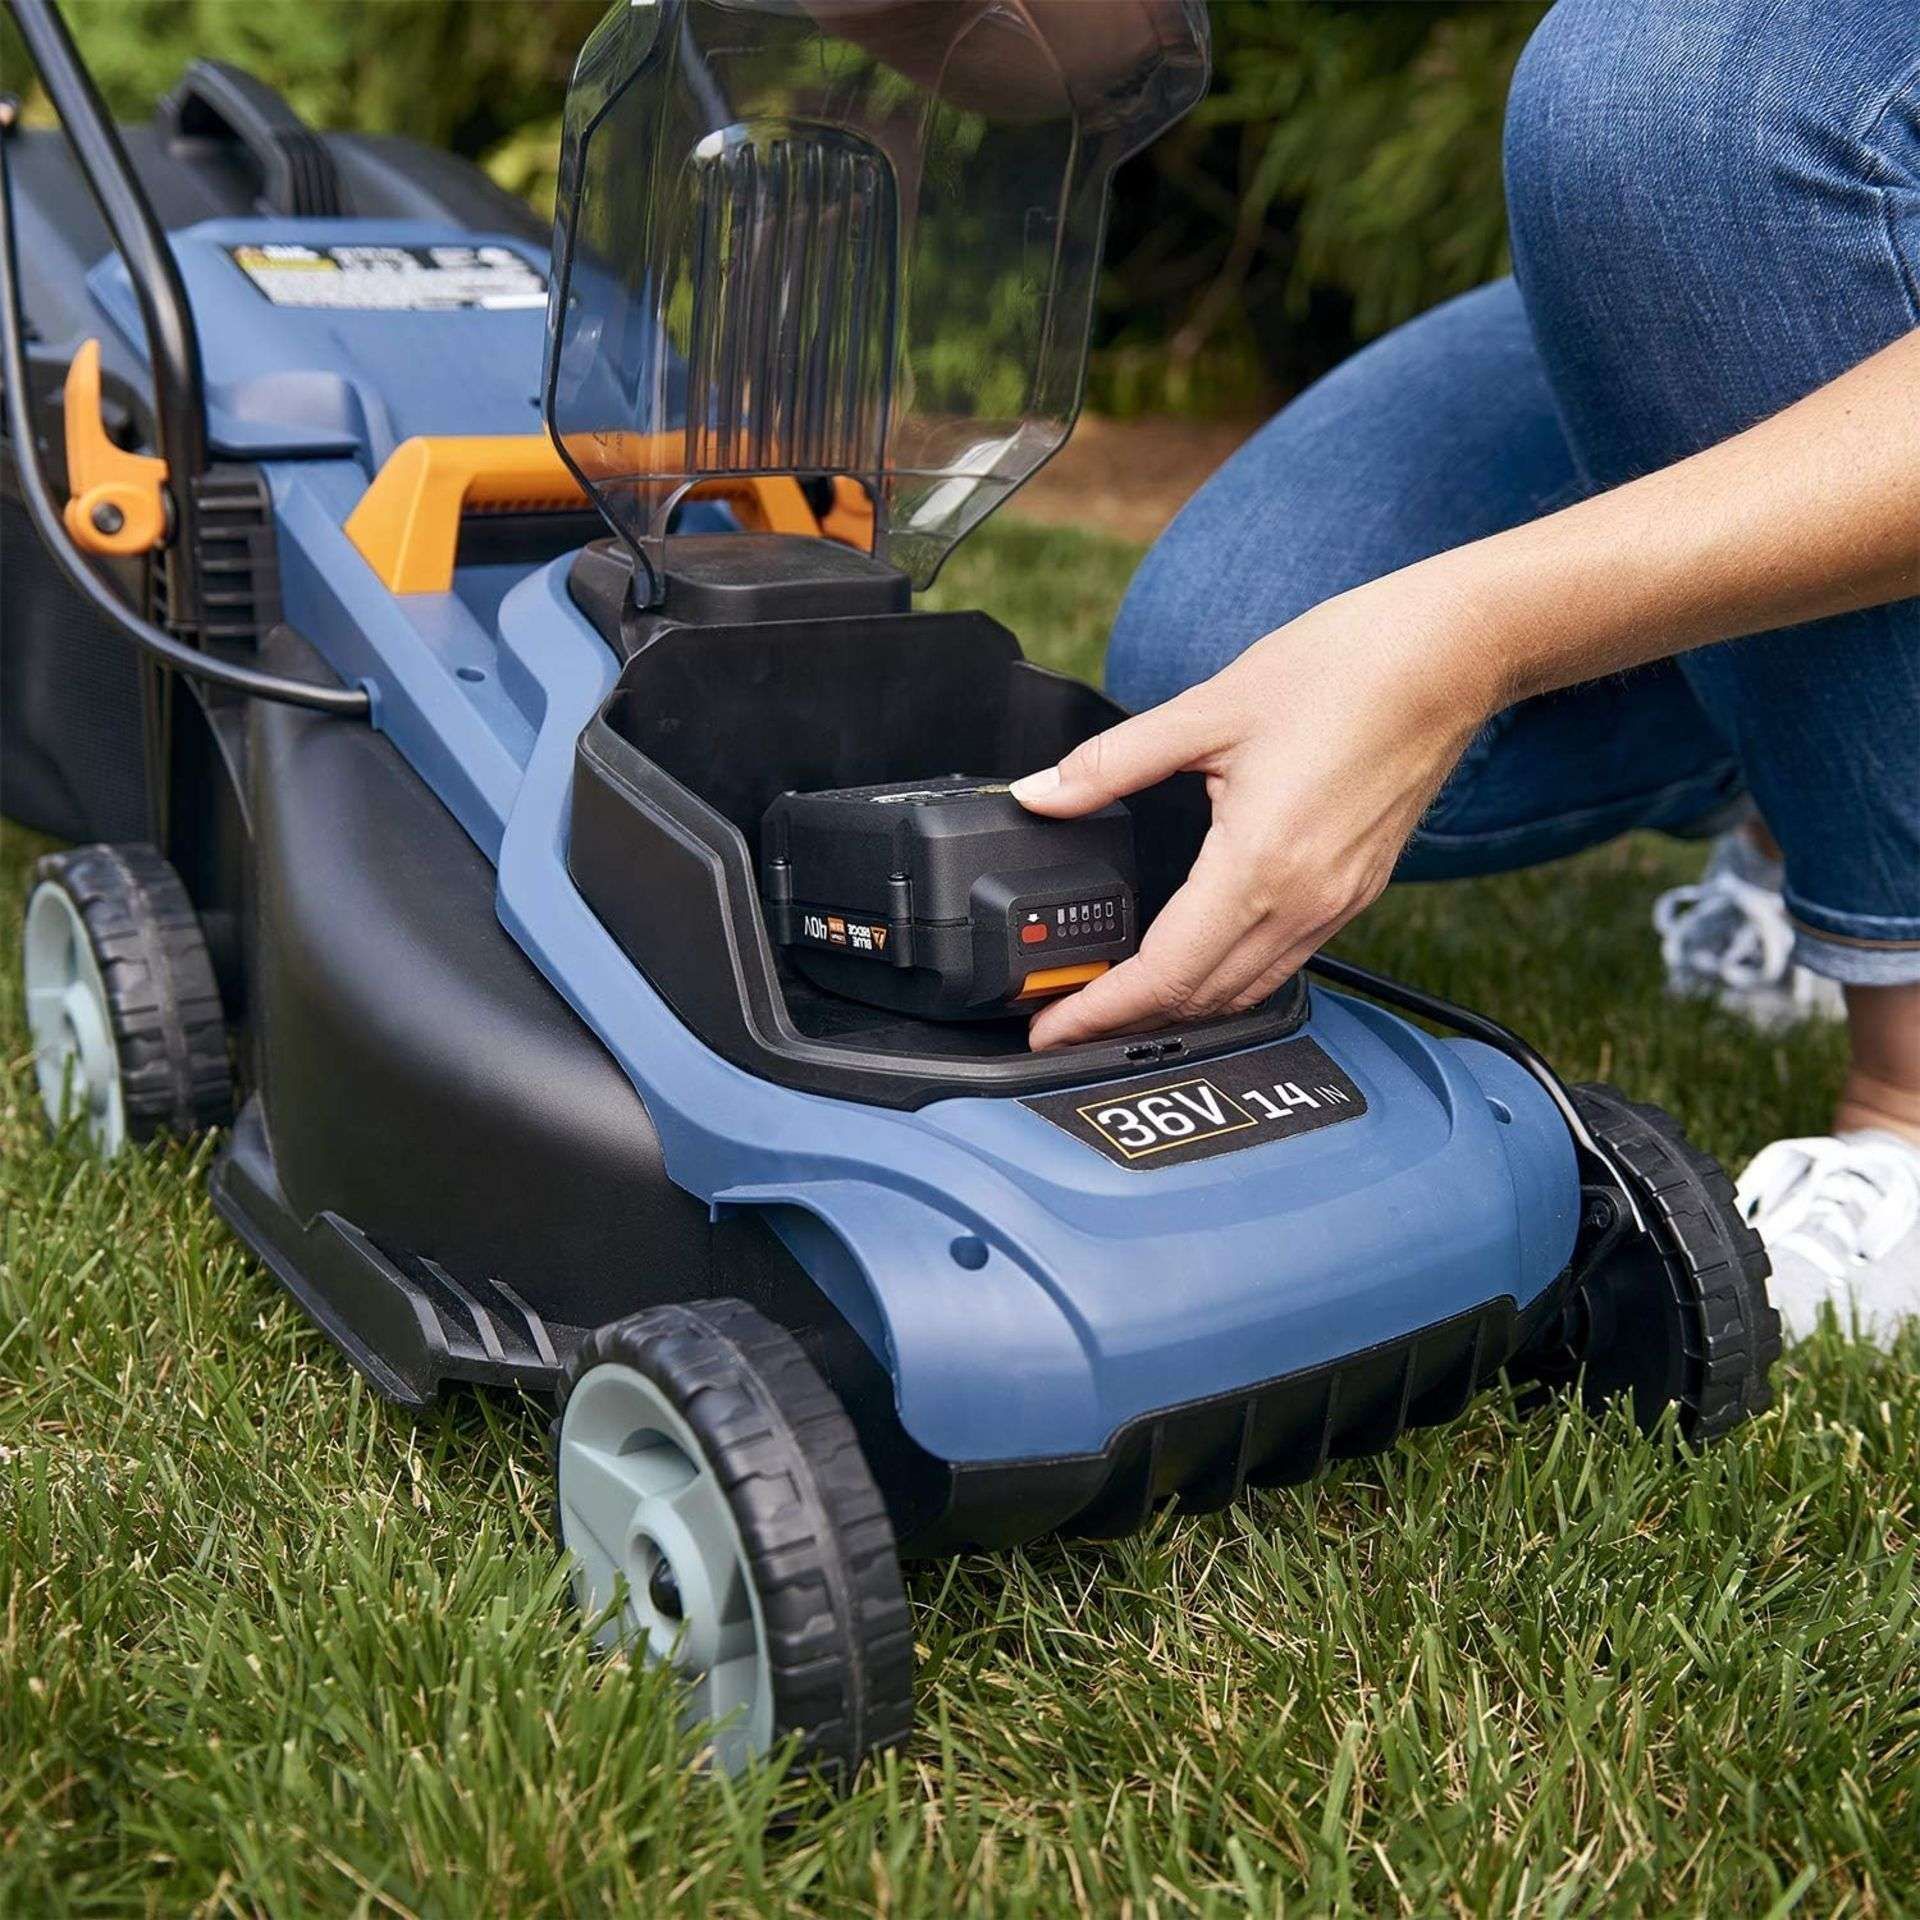 TRADE LOT 5 X NEW & BOXED BLUE RIDGE 36V Cordless Lawnmower with 2.0 Ah Li-ion Battery. RRP £229 - Image 2 of 3